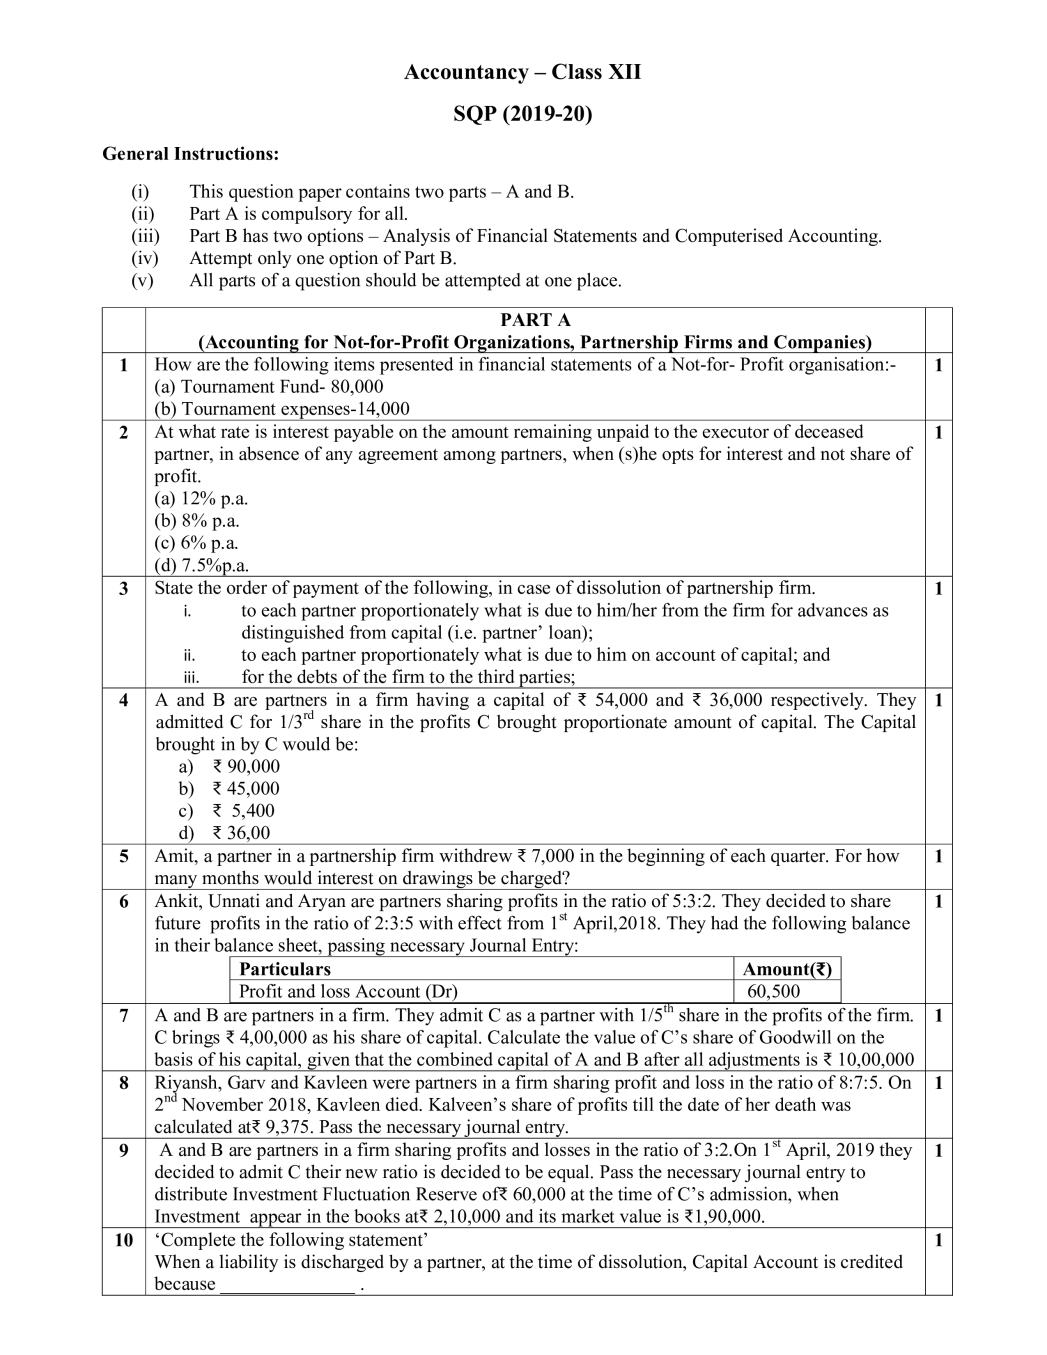 CBSE Class 12 Sample Paper 2020 for Accountancy - Page 1